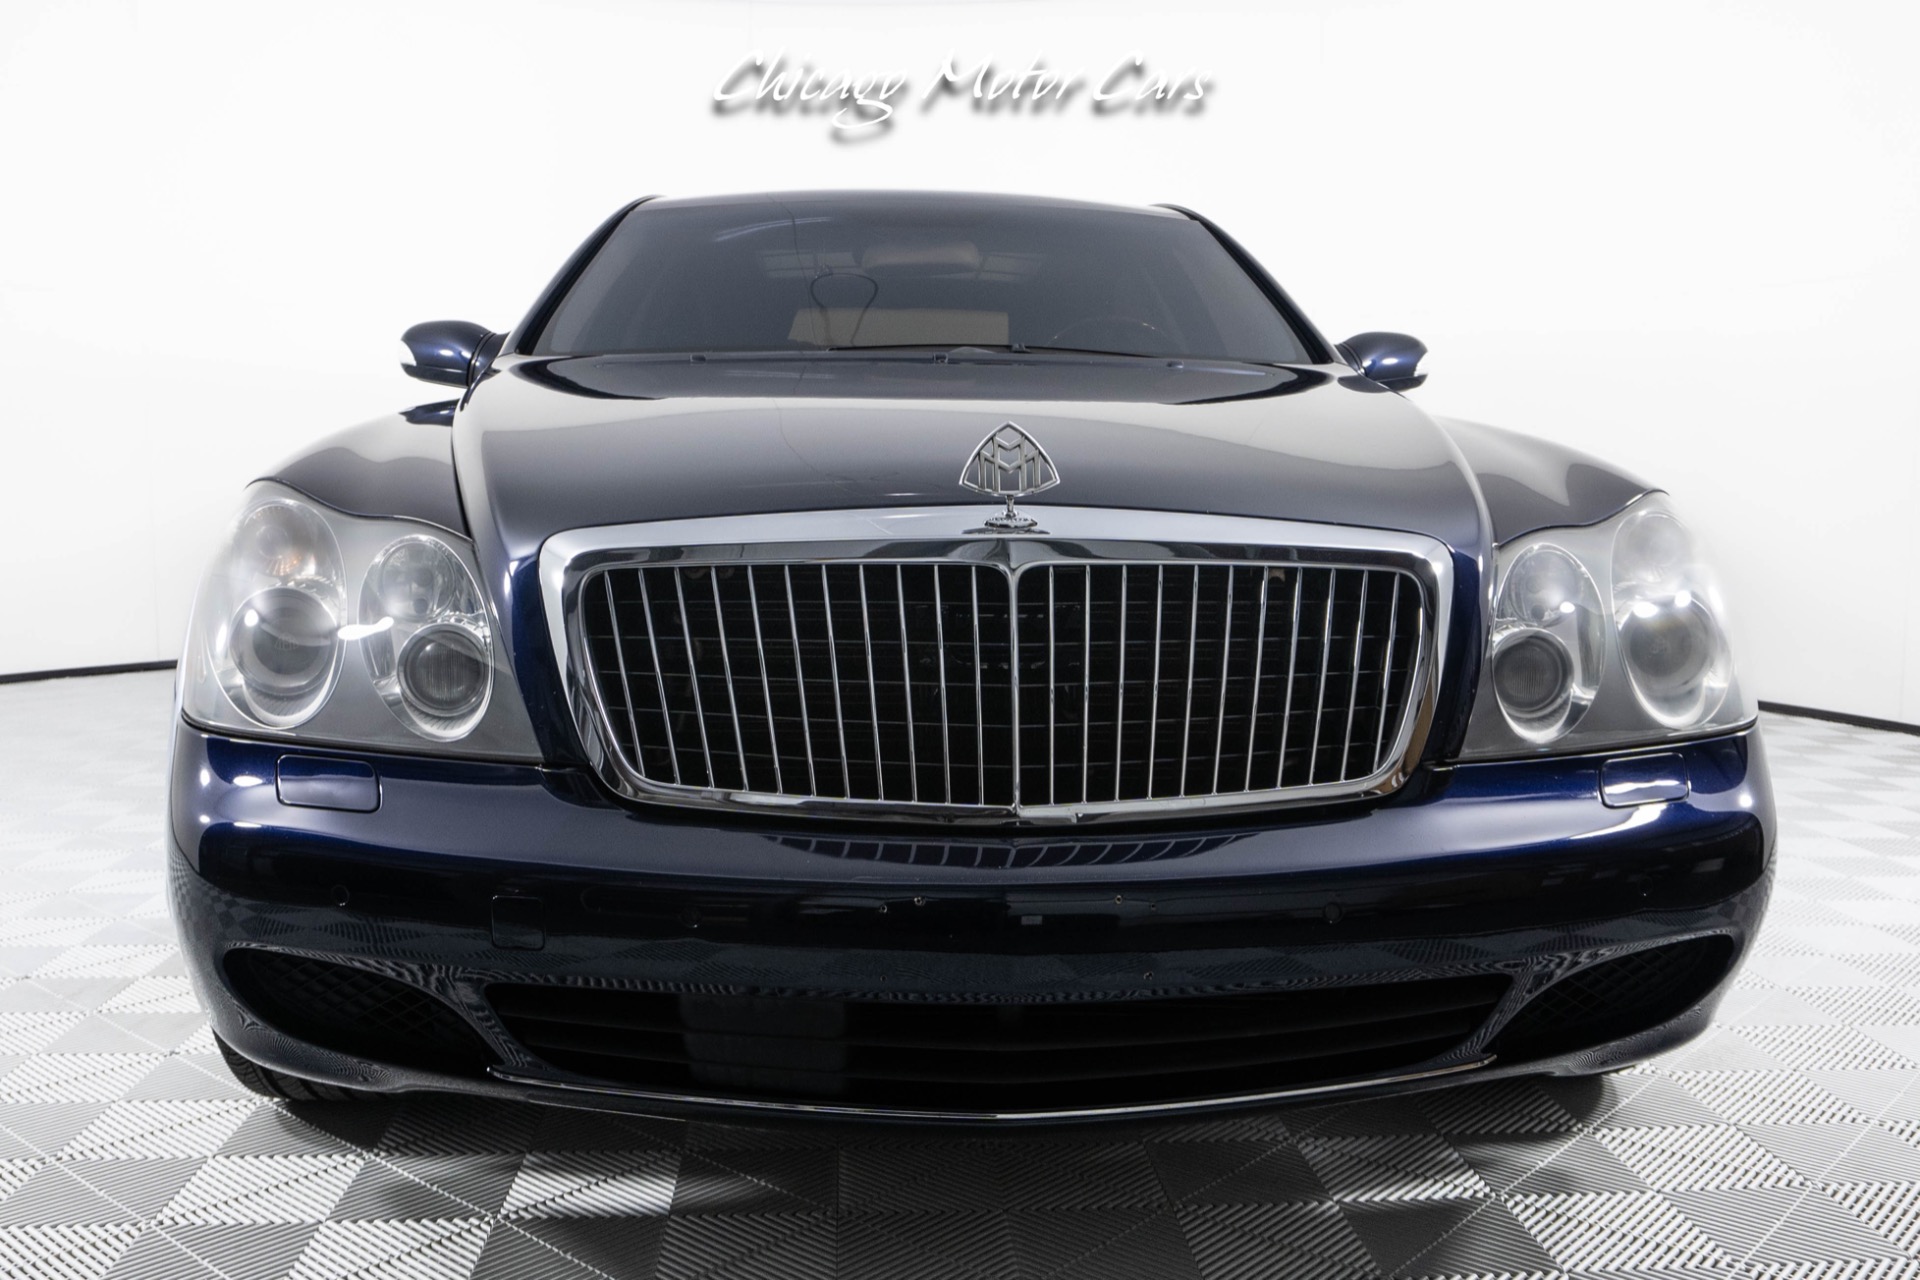 Used-2004-Maybach-62-LWB-Electrotransparent-Glass-Roof-Ventilated-Front-and-Rear-Seats-Loaded